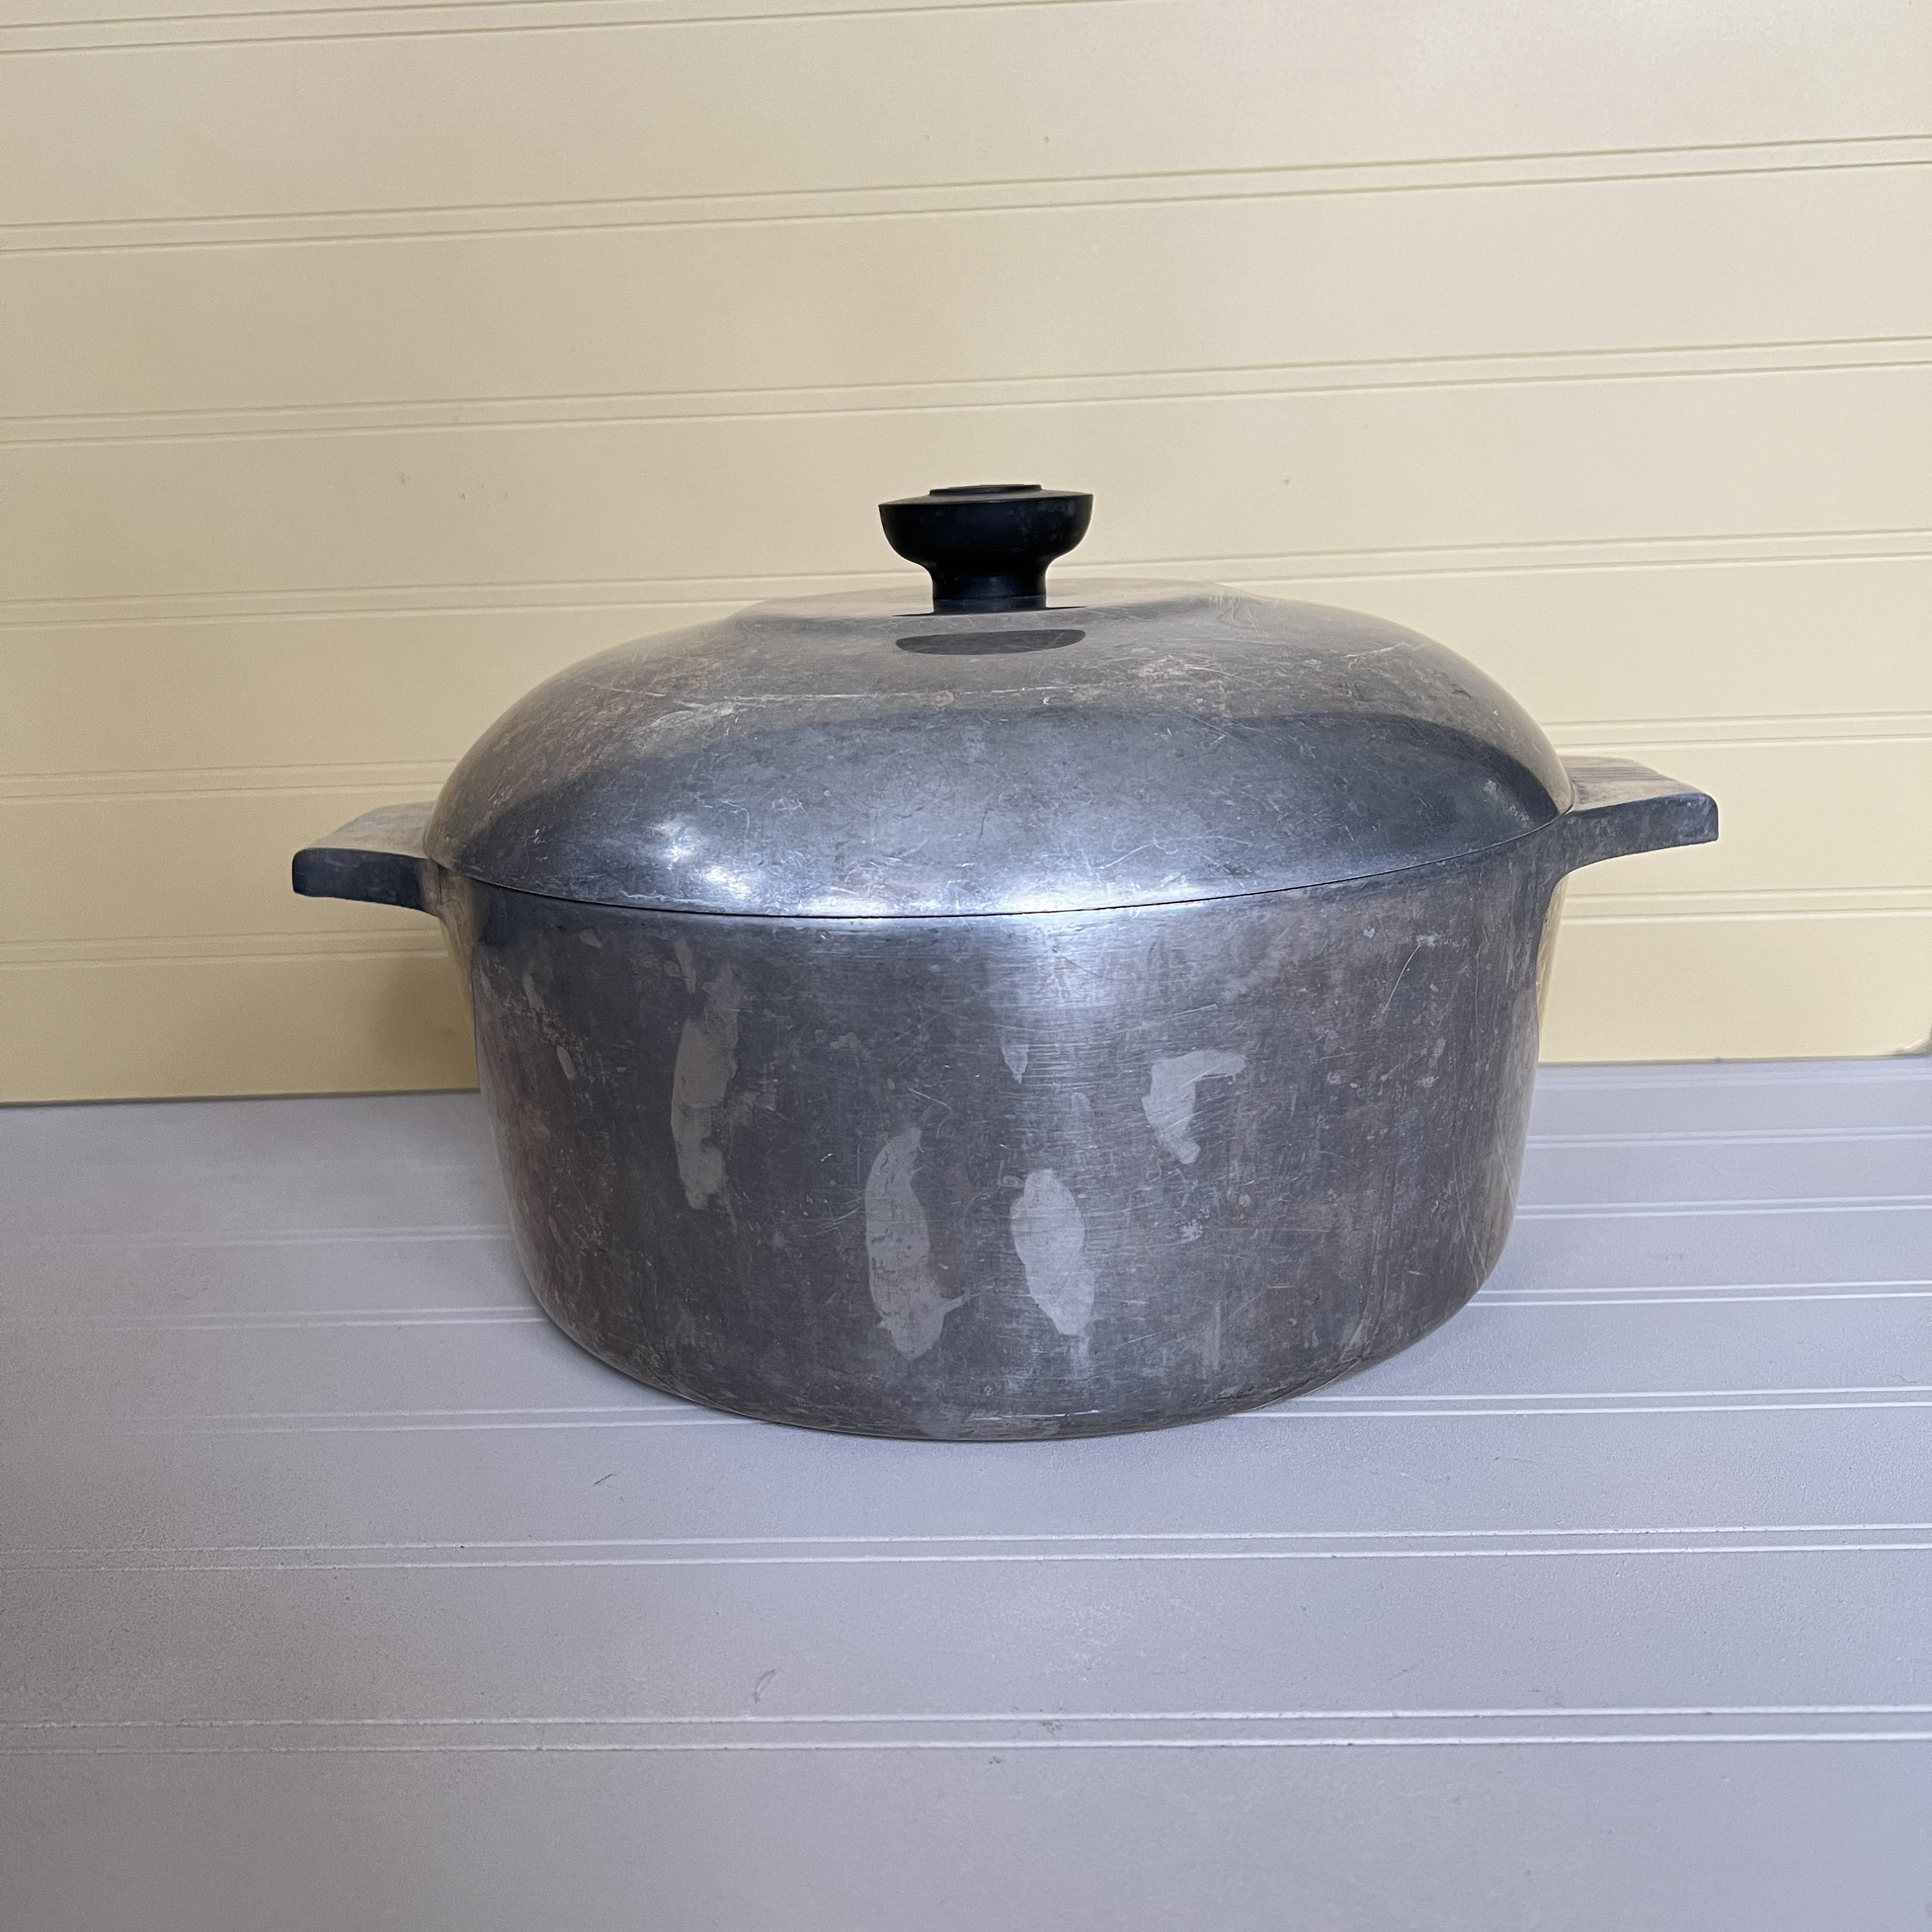 Sold at Auction: Wagnerware Magnalite Roaster Dutch Oven with Rack